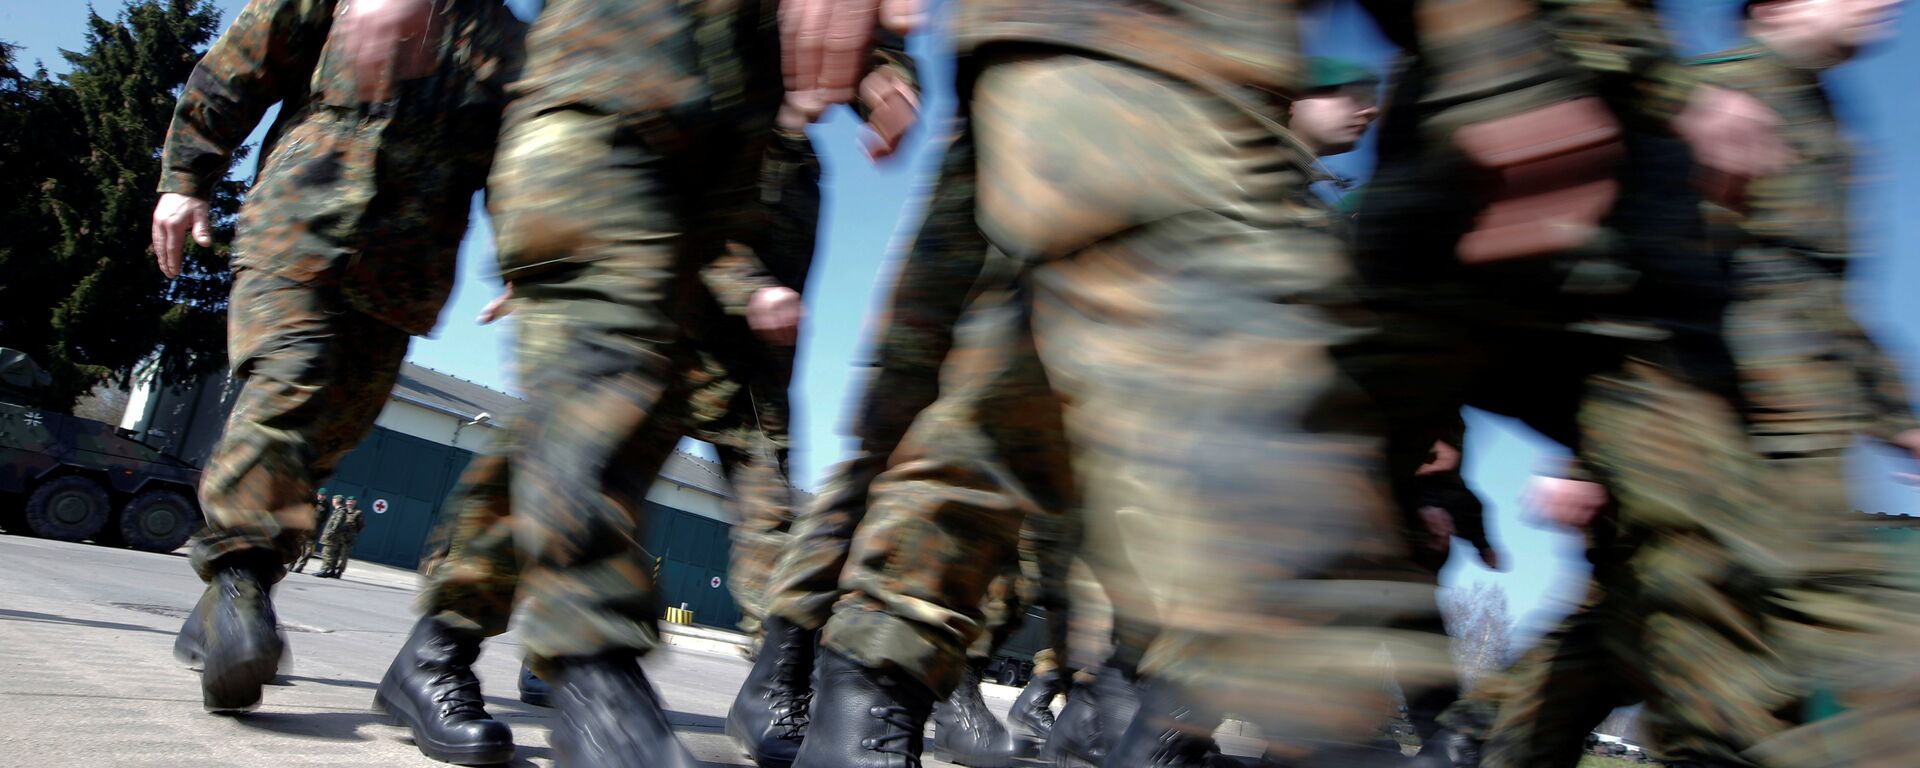 German Bundeswehr armed forces soldiers of the 371st armoured infantry battalion march during a media day of the NATO drill 'NOBLE JUMP 2015' at the barracks in Marienberg April 10, 2015 - Sputnik International, 1920, 28.08.2018